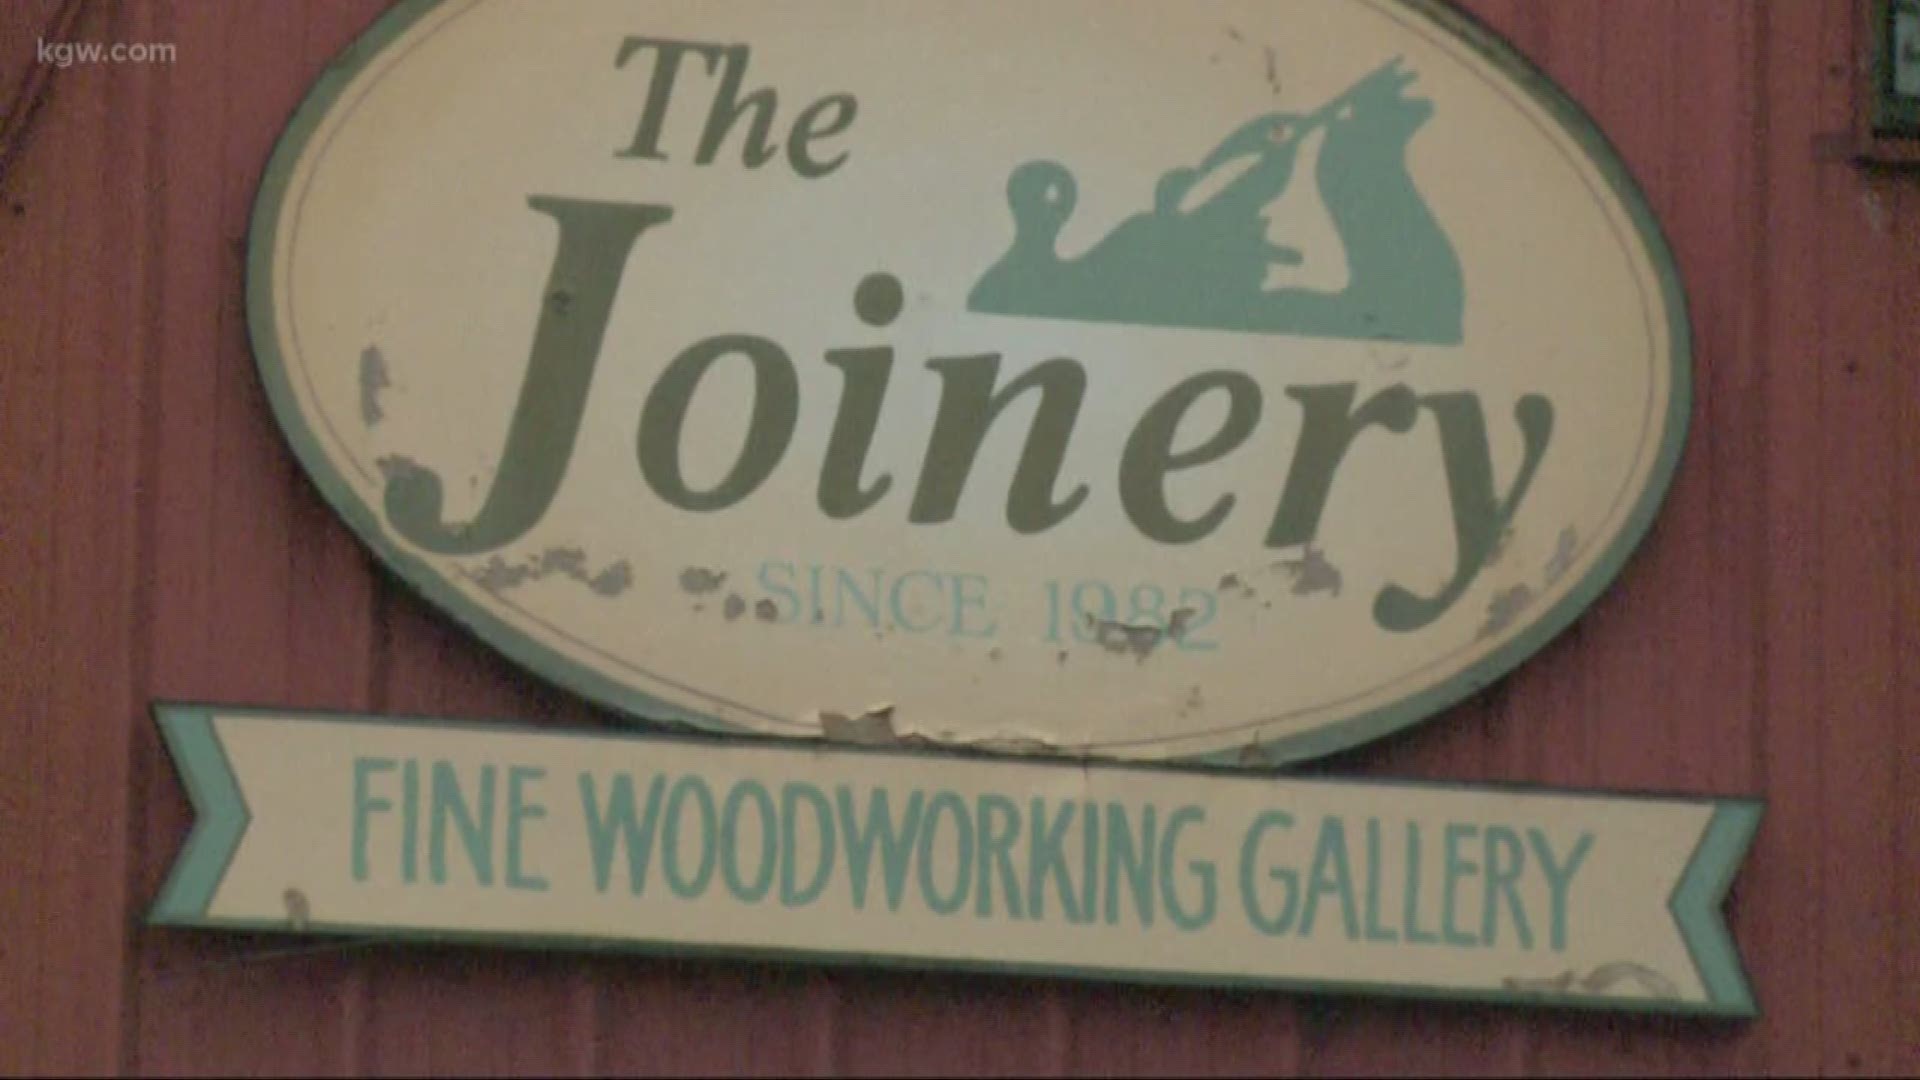 The Joinery students are auctioning off their creations during a fundraising effort.